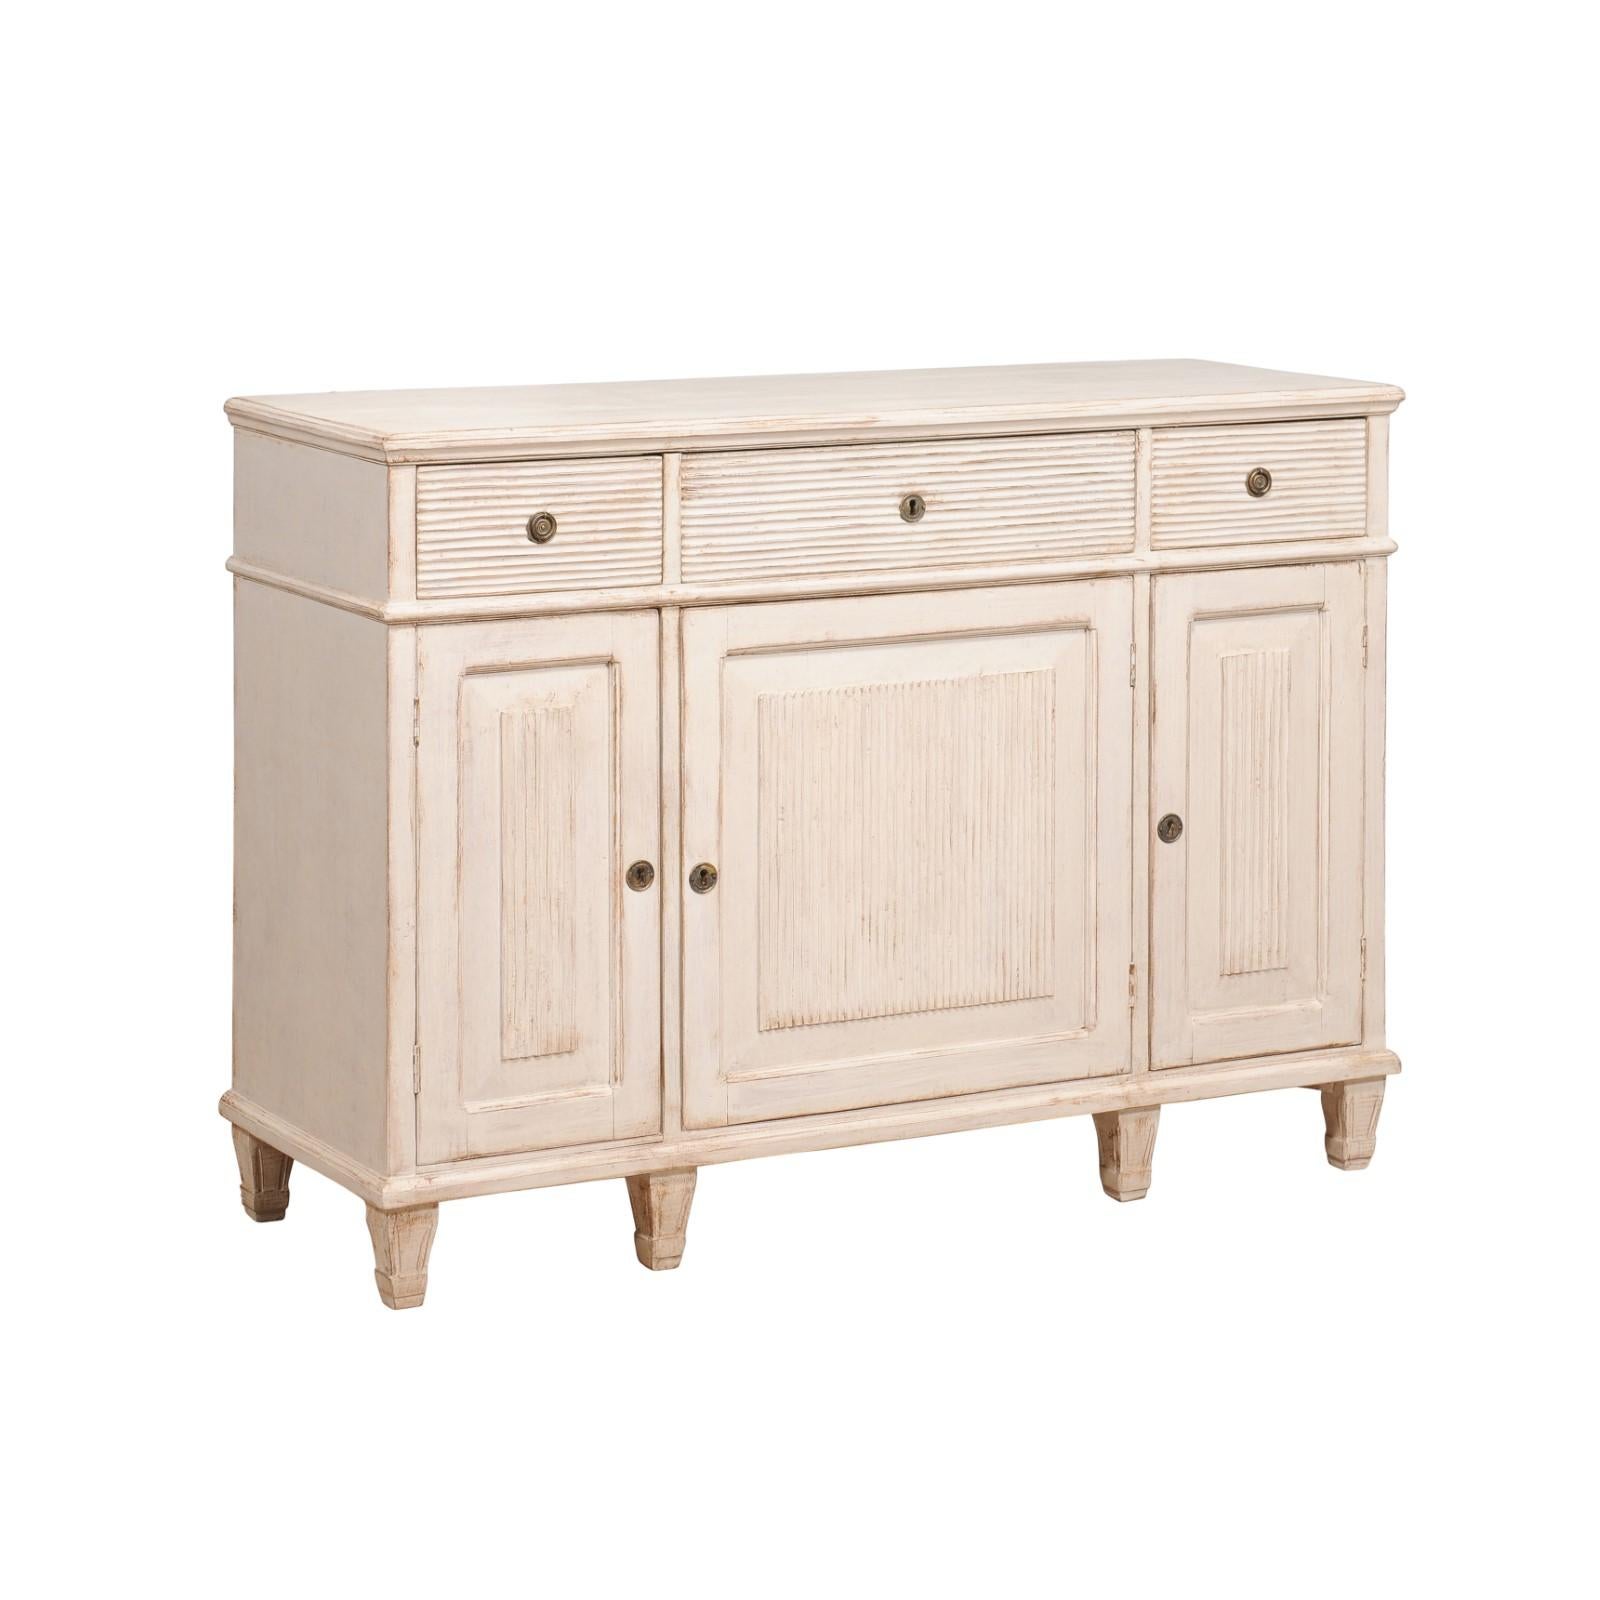 A Swedish 1850s sideboard from Dalarna, with off white, antique beige painted finish, three drawers over three doors, carved reeded motifs and short tapering feet. Bask in the elegant allure of this 1850s Swedish Sideboard, a charming artifact from